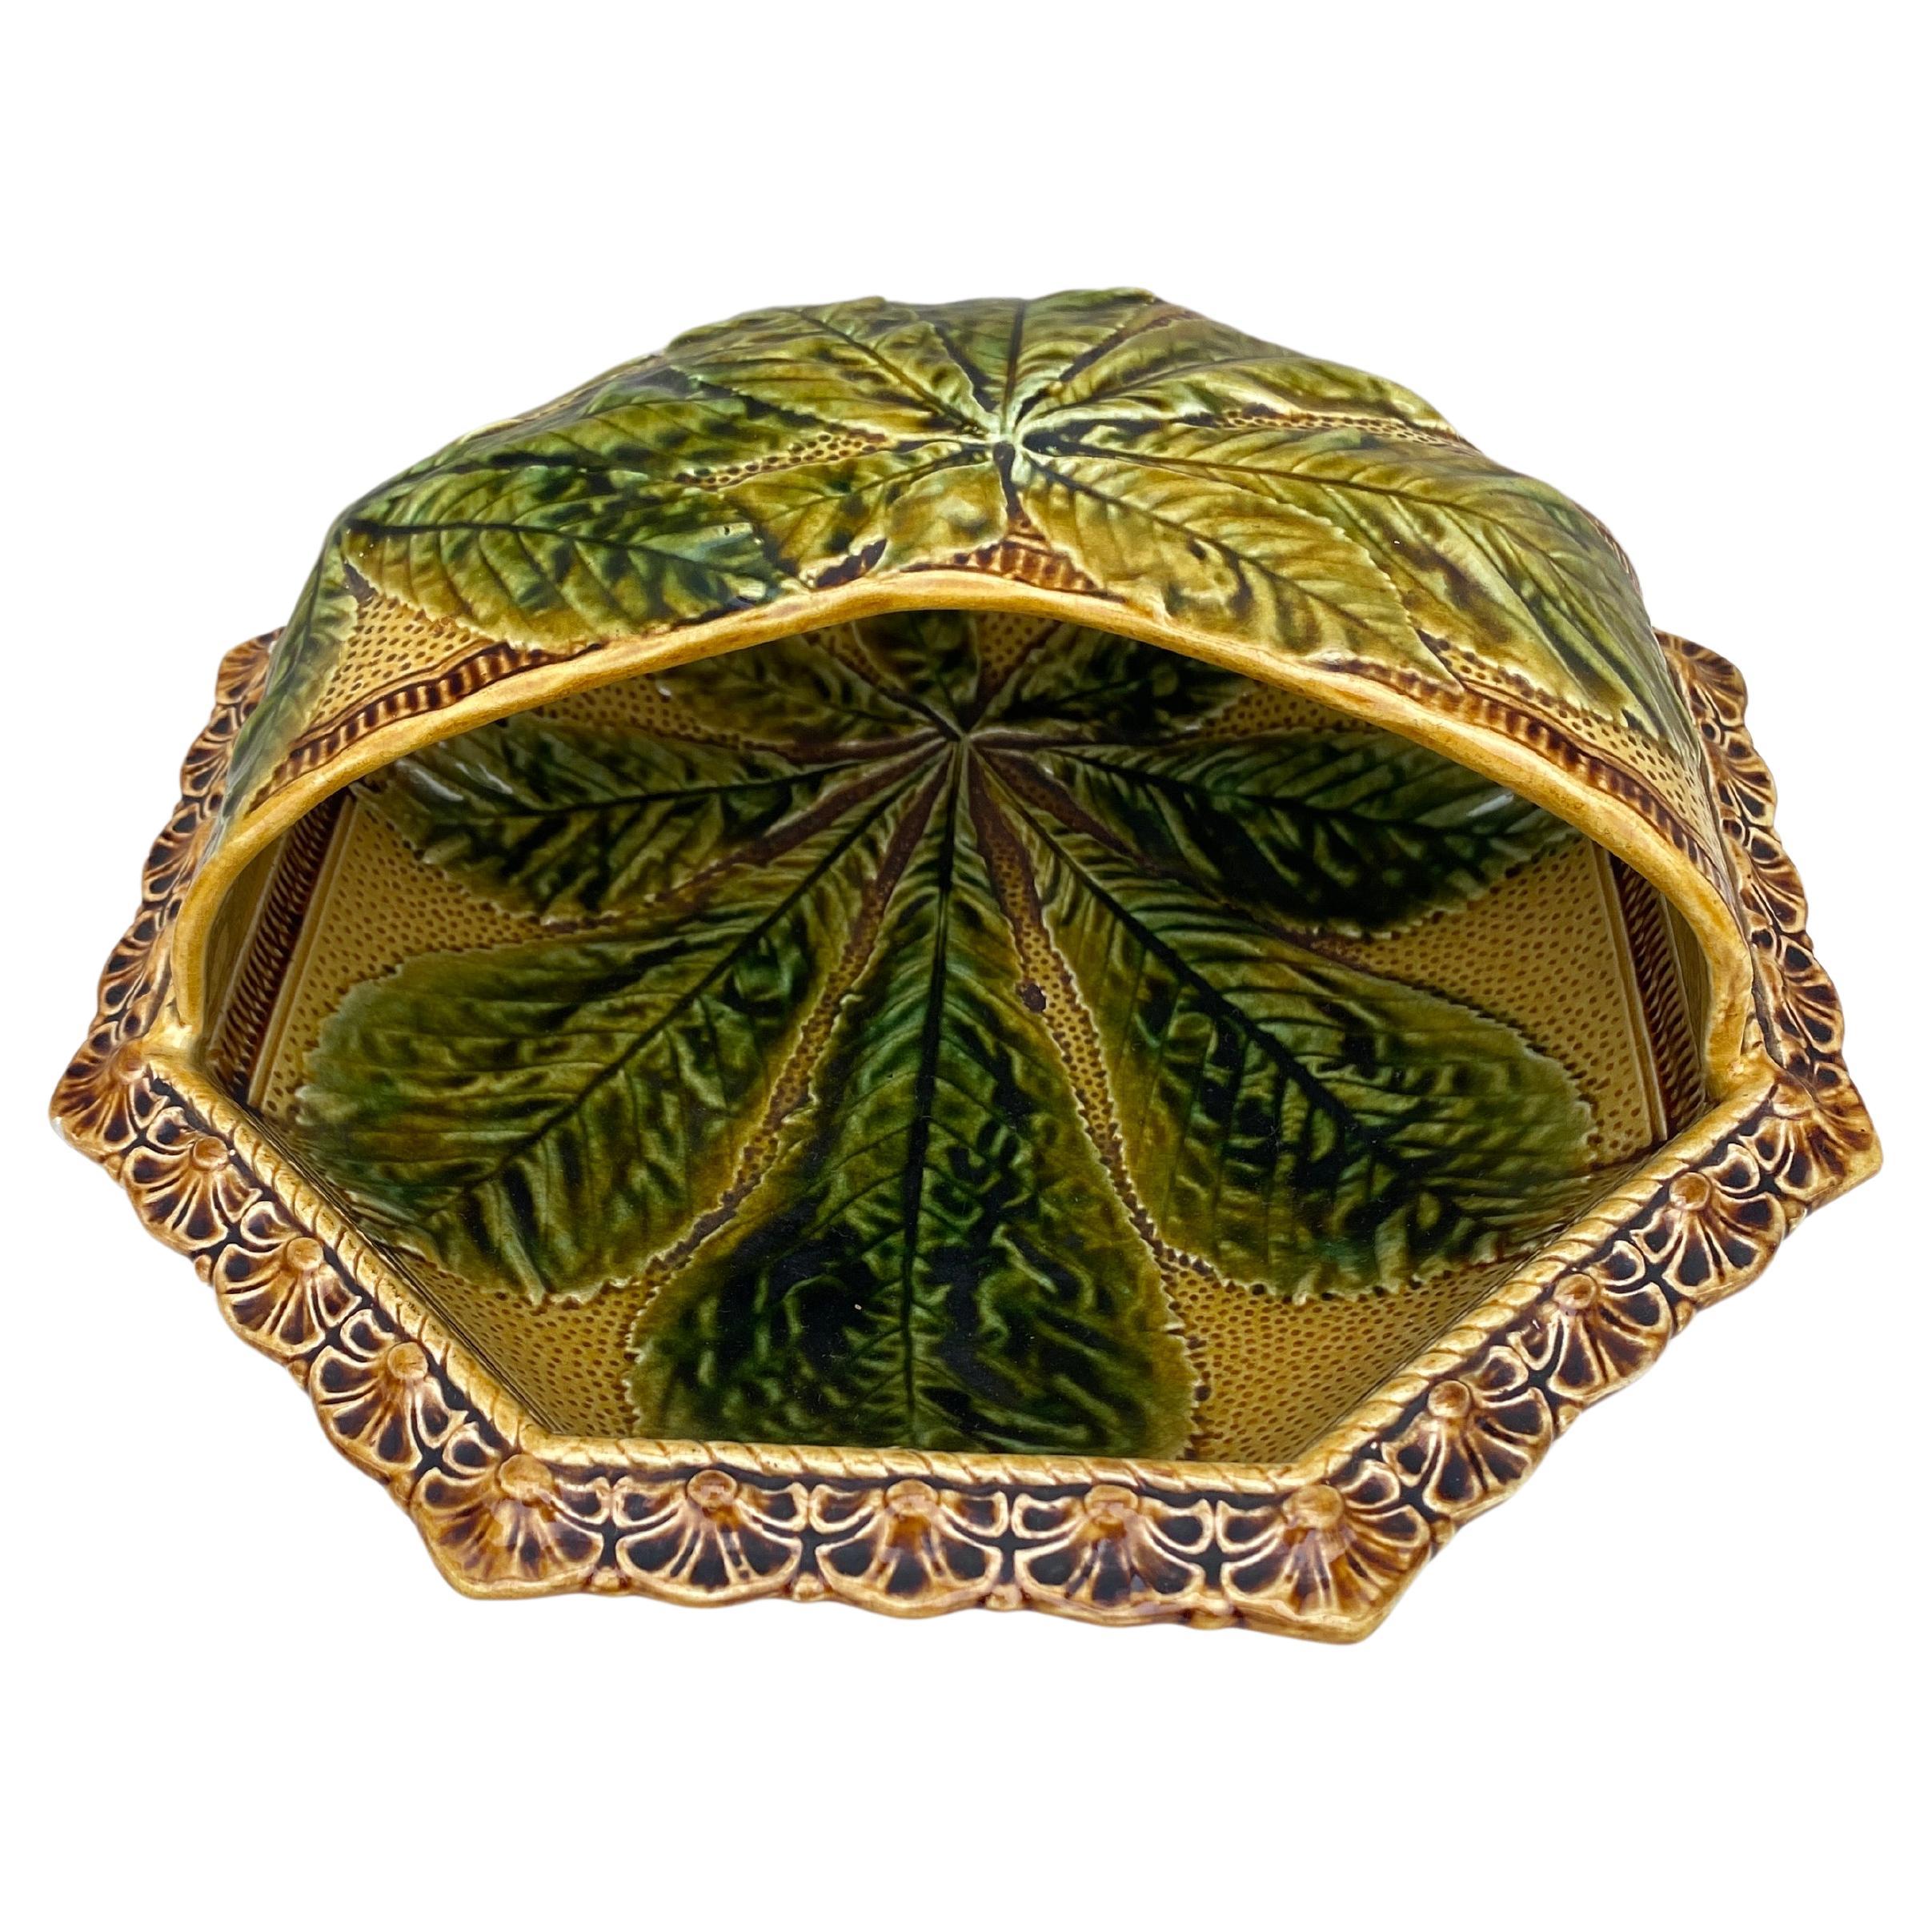 19th Century French Majolica Chesnut Server  In Good Condition For Sale In Austin, TX